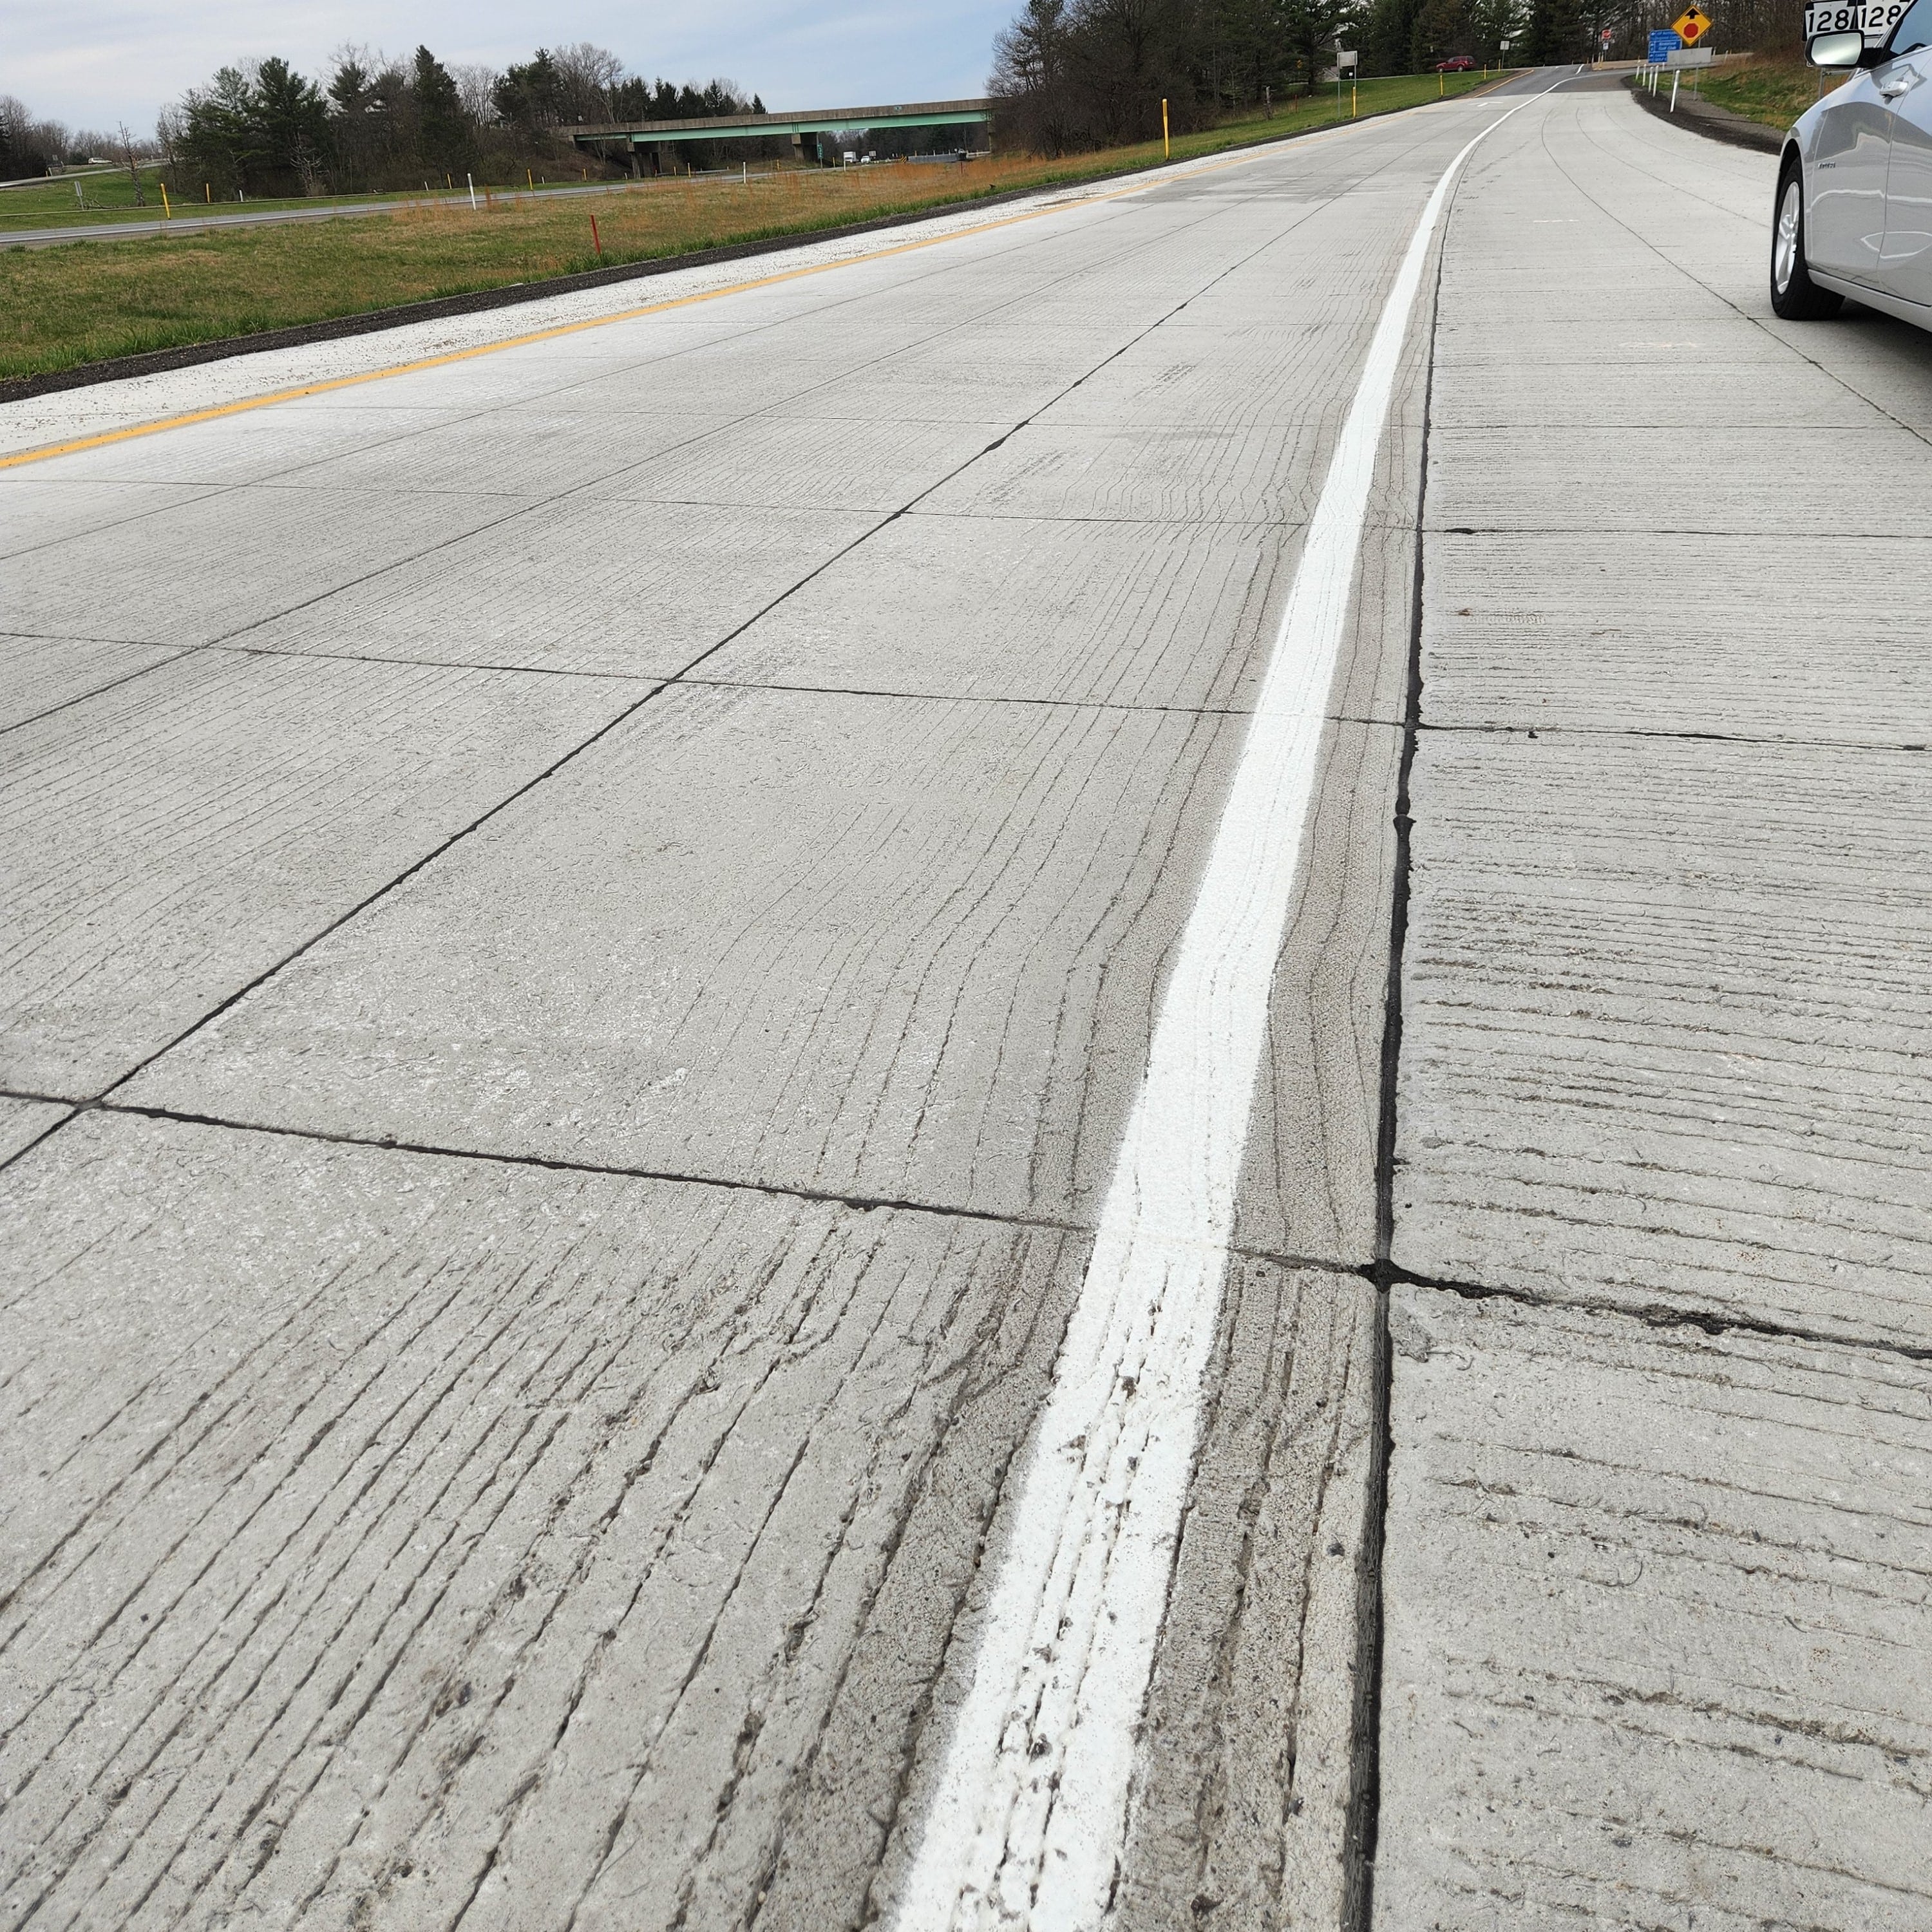 An image showing a close up look of the thin-bonded concrete overlay placement on an exit ramp with a silver car parked on the shoulder of the ramp 